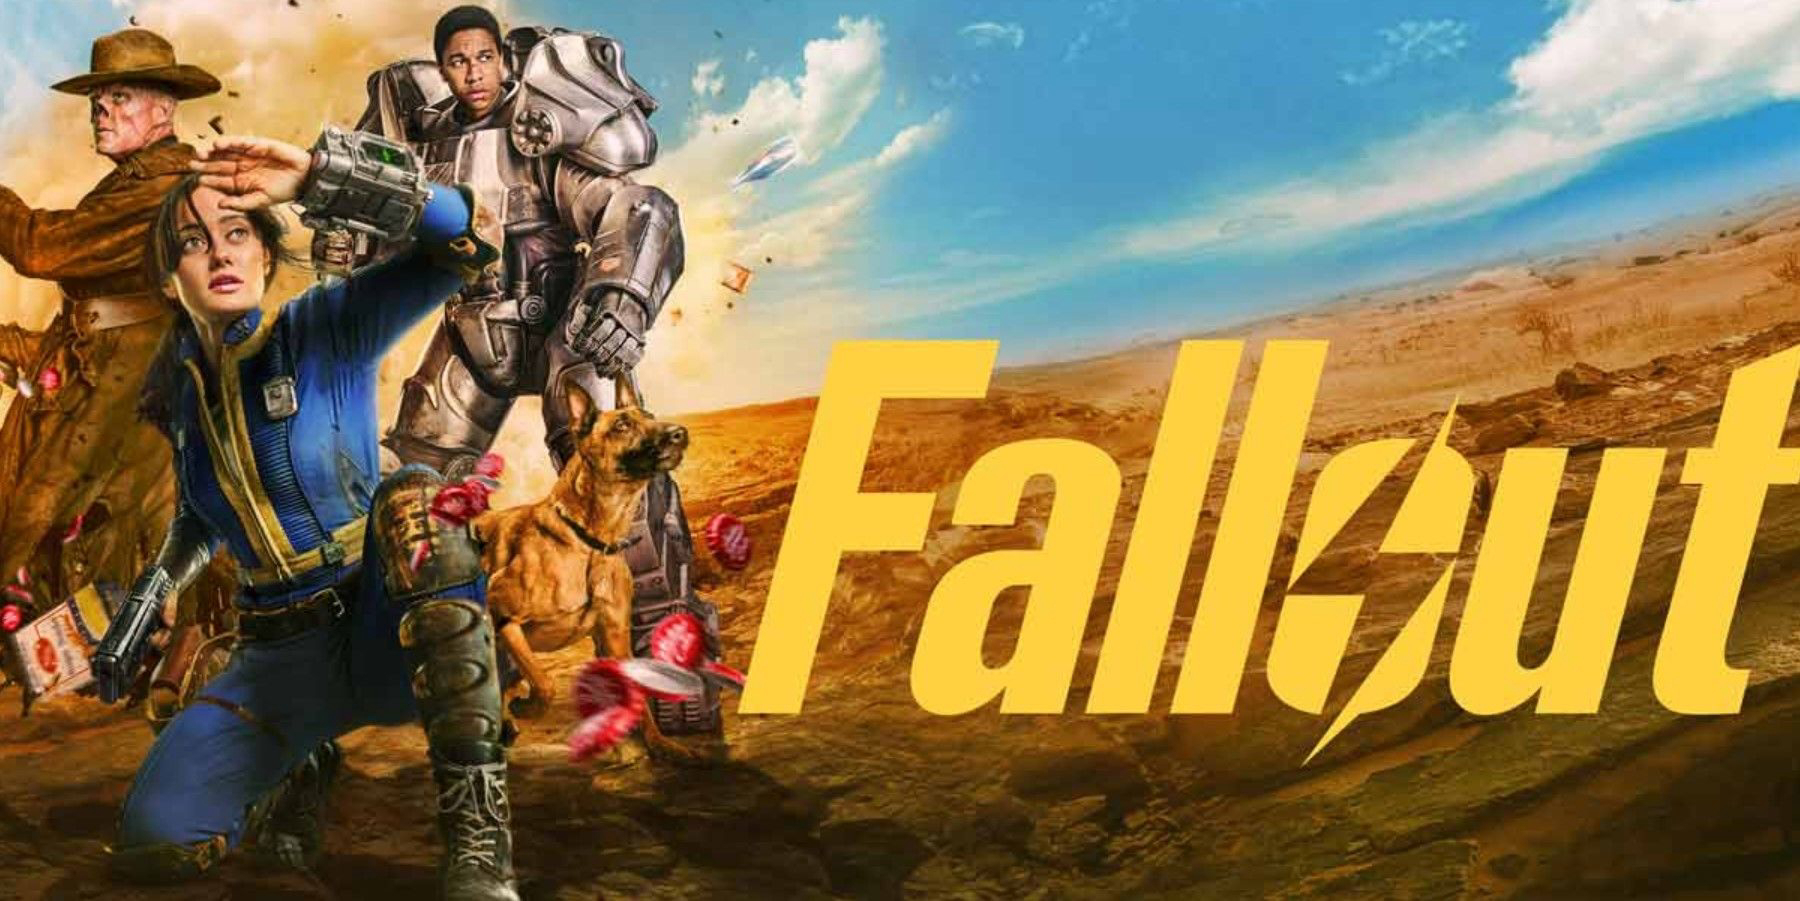 Promotional artwork for the video game “Fallout” featuring various characters, including a man in armor, a woman in a blue jumpsuit holding a gun and shielding her eyes, a dog, and a person in a hat in the background, set